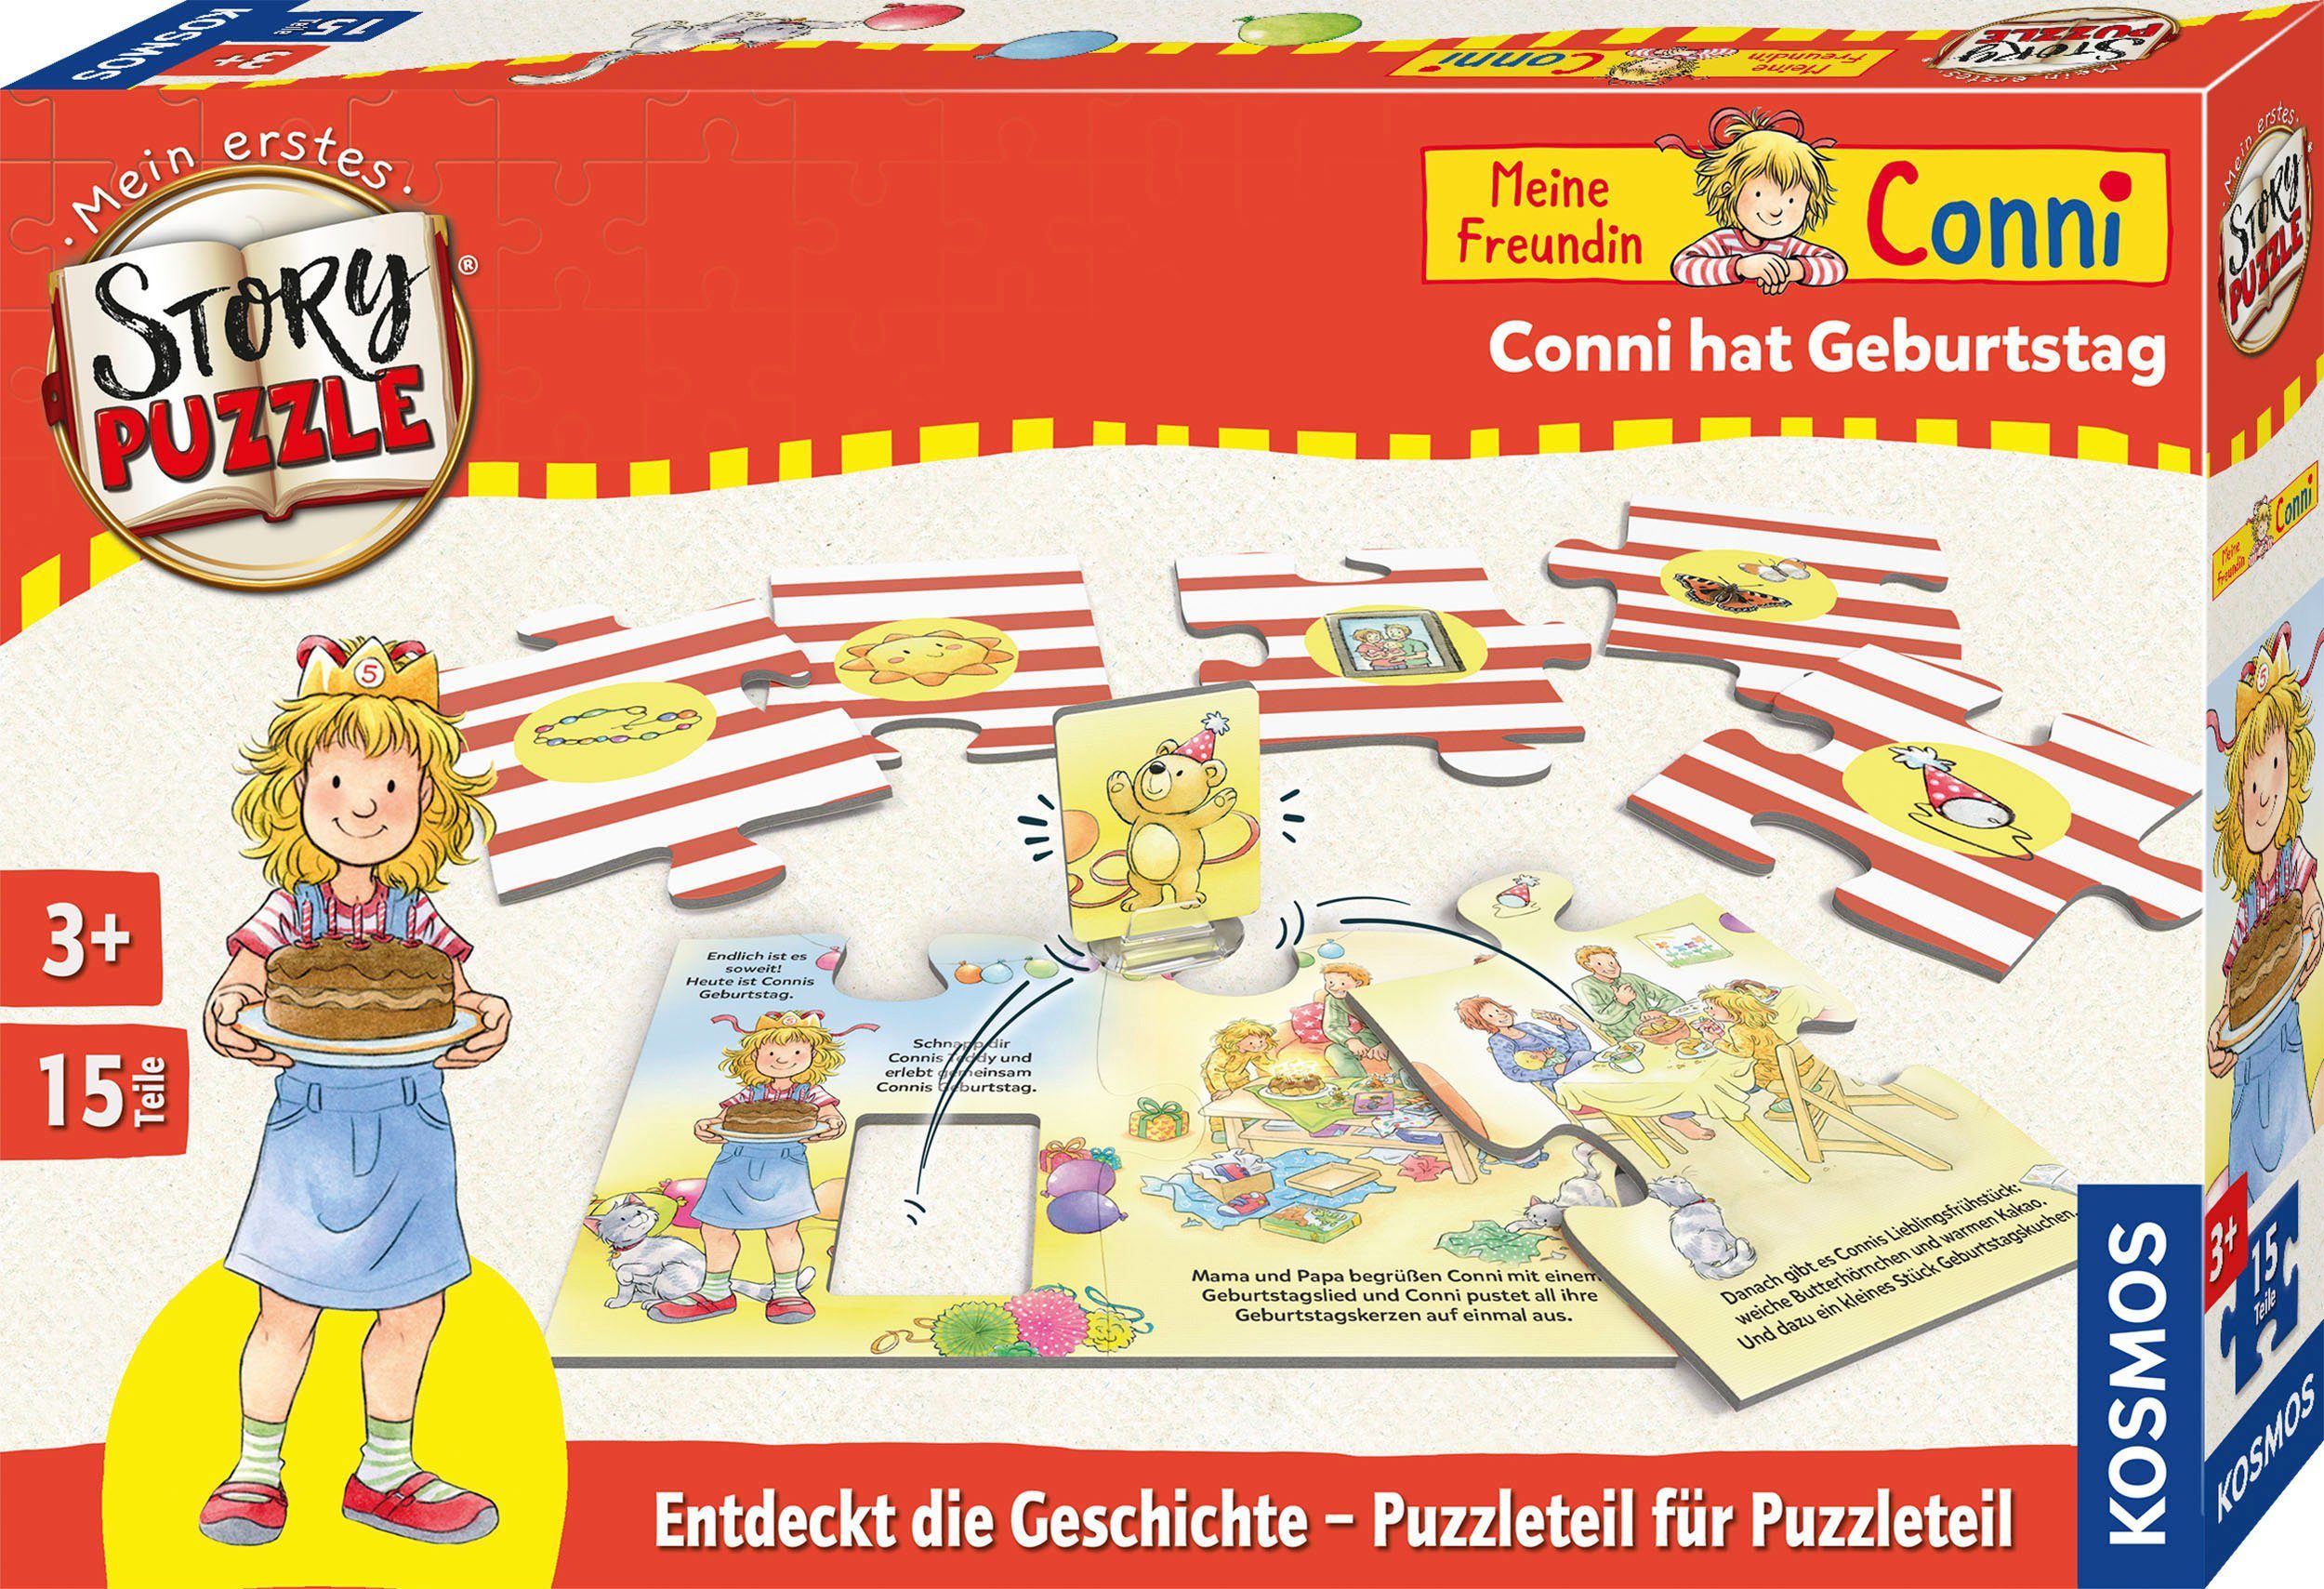 Kosmos Puzzle Mein Germany Story-Puzzle Made hat Puzzleteile, in erstes - 15 Conni Geburtstag